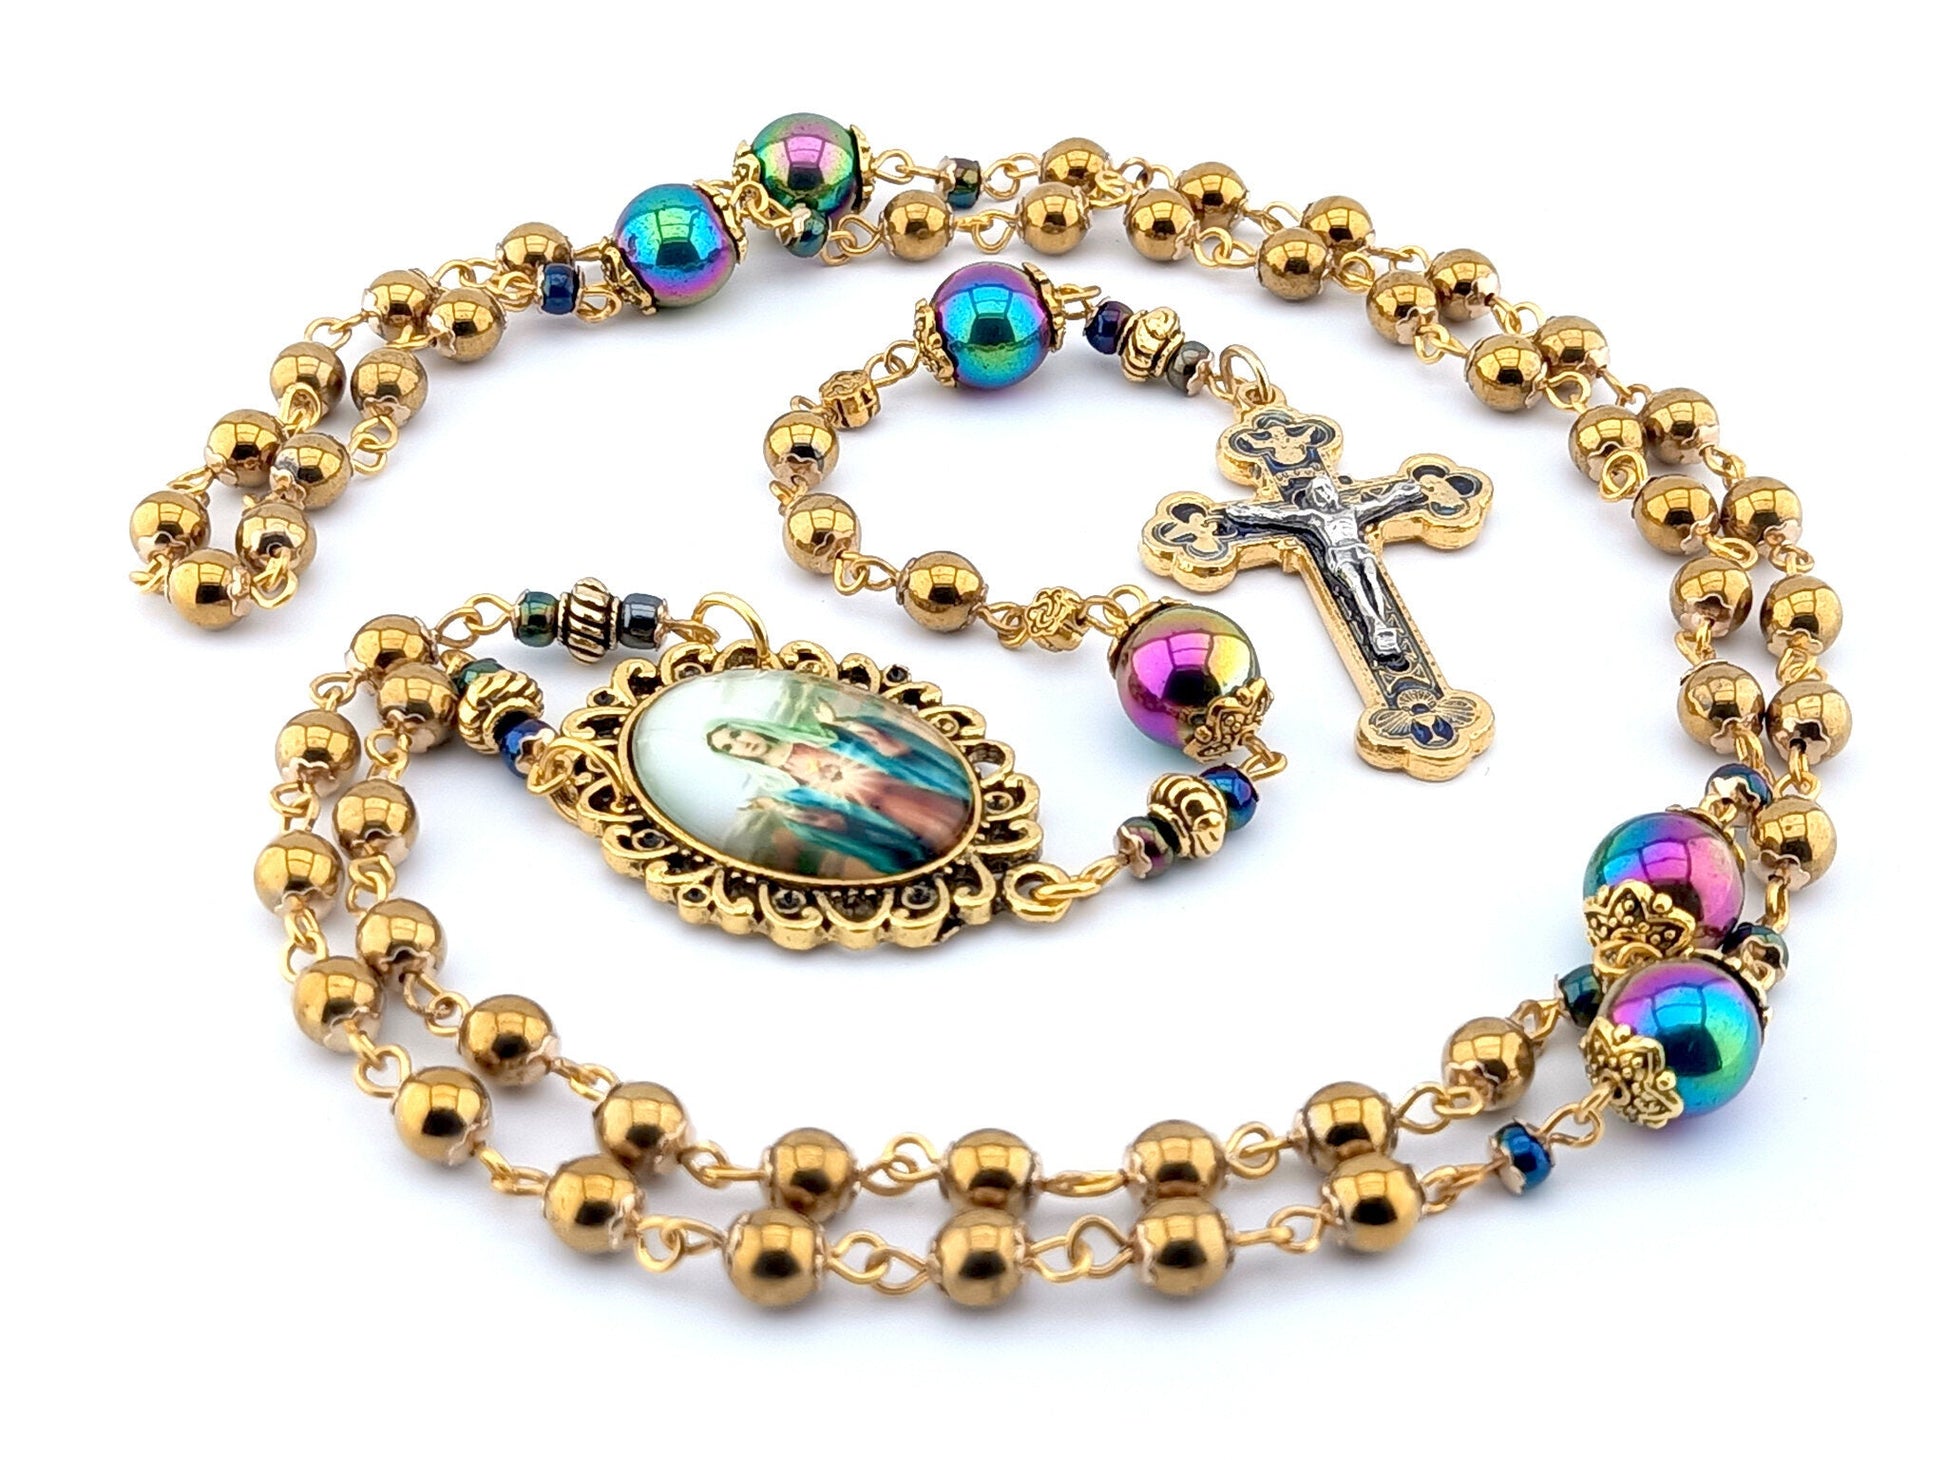 Immaculate Heart of Mary unique rosary beads with gold hematite and petrol beads, gold and blue crucifix and picture centre medal.